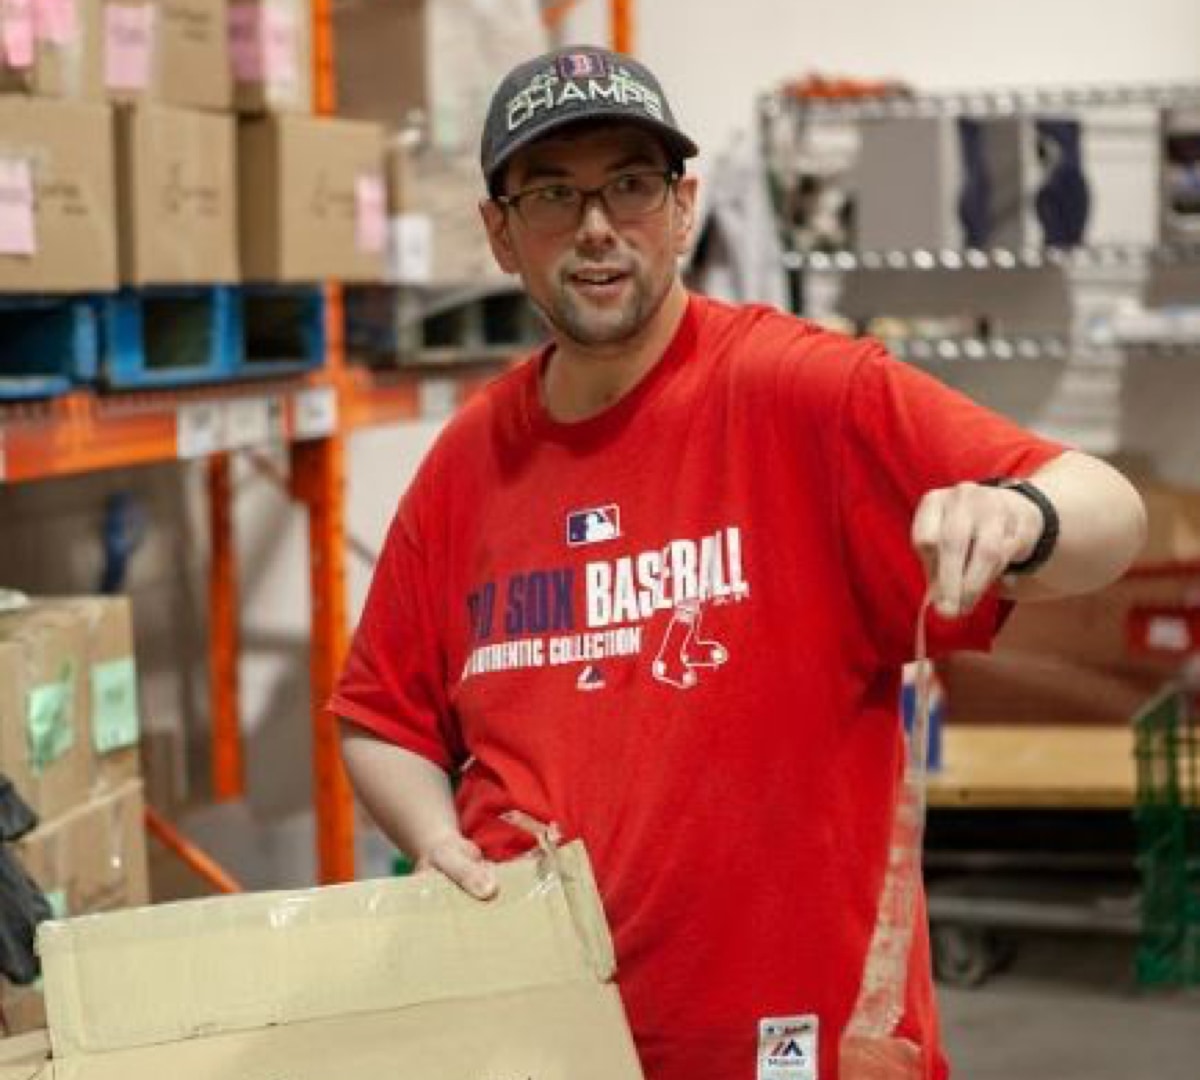 Male client is smiling while standing in a wearhouse holding a peice of cardboard while he breaks down boxes at food bank during volunteer placement.